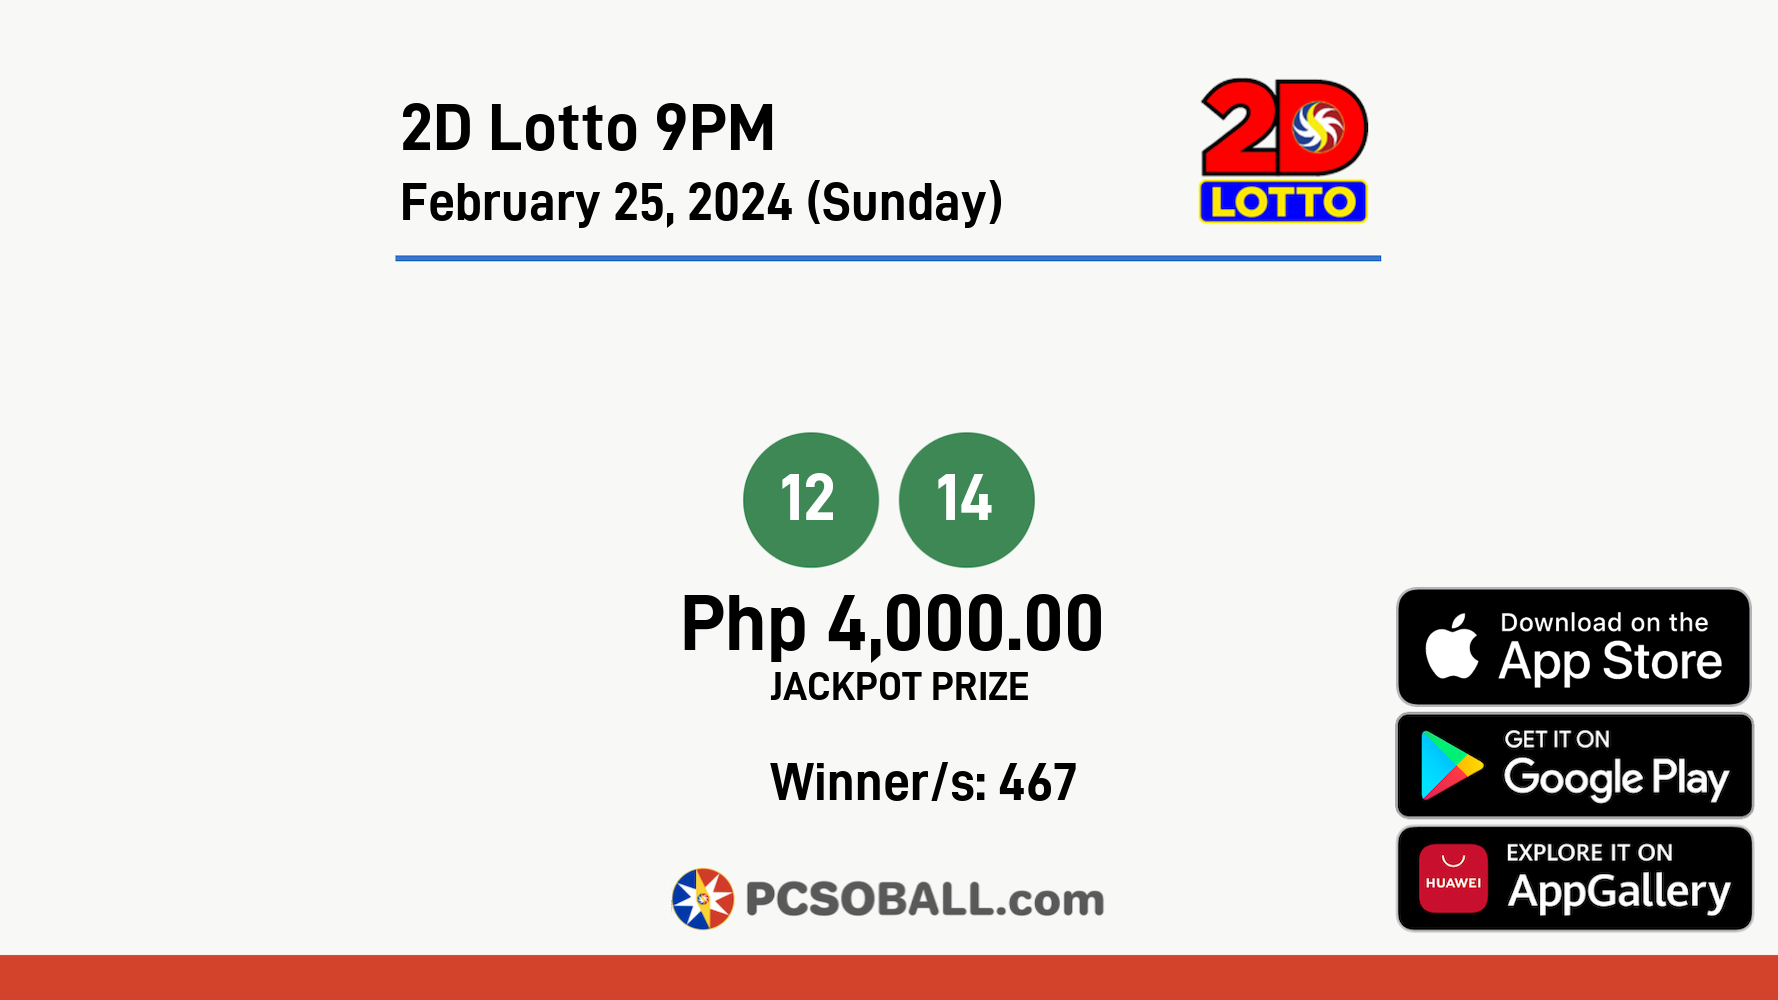 2D Lotto 9PM February 25, 2024 (Sunday) Result